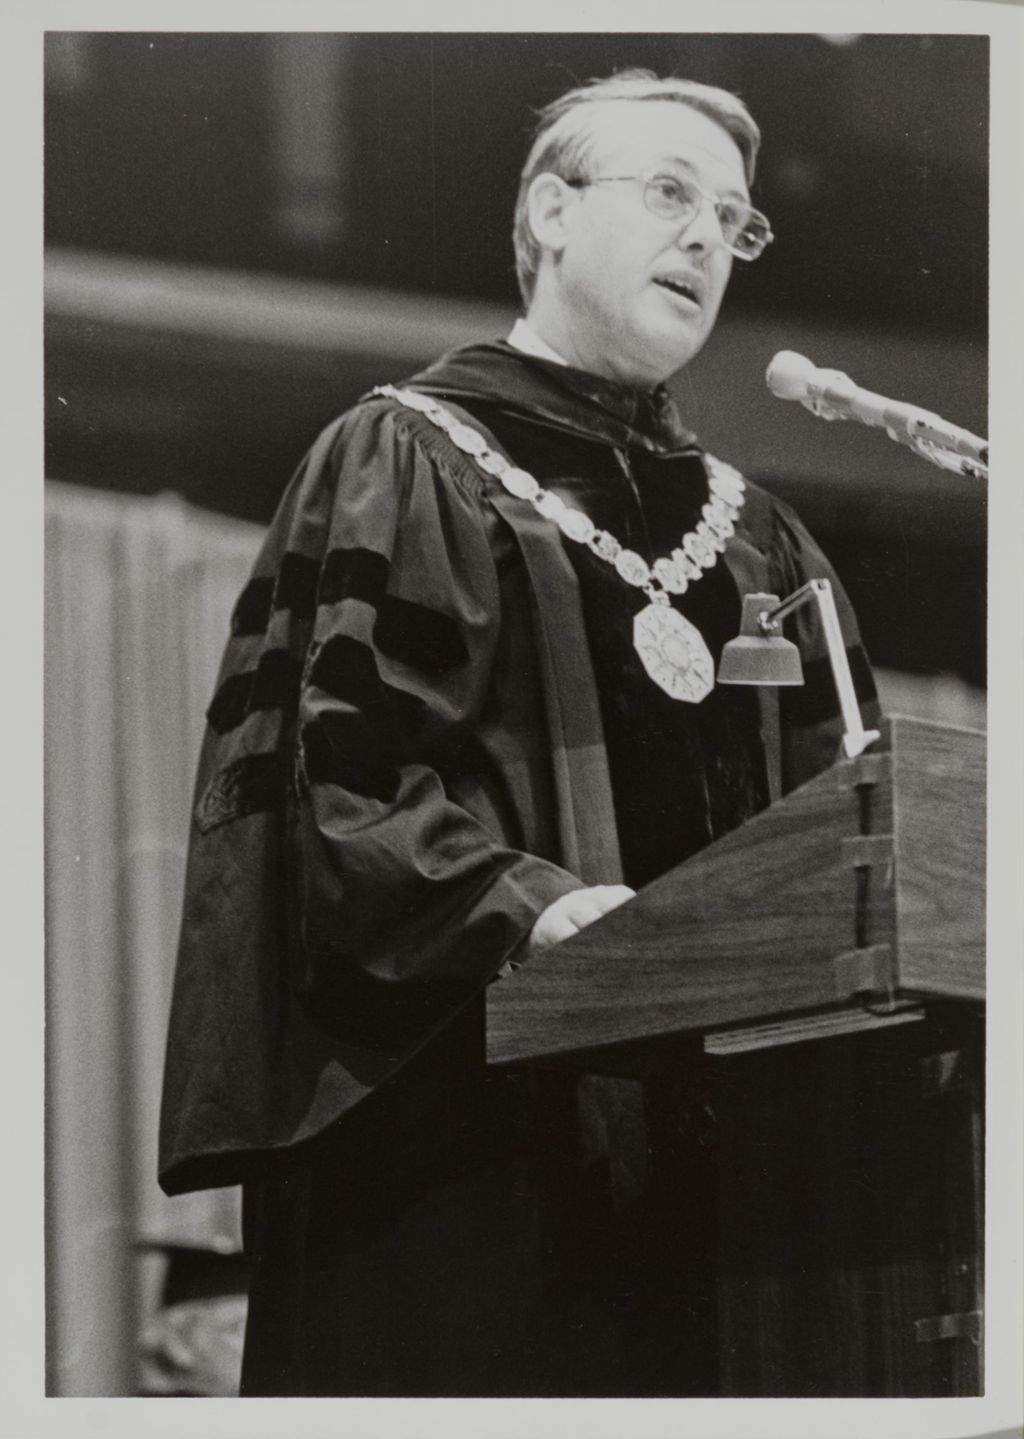 Miniature of University of Illinois President Stanley O. Ikenberry addressing the audience at graduation